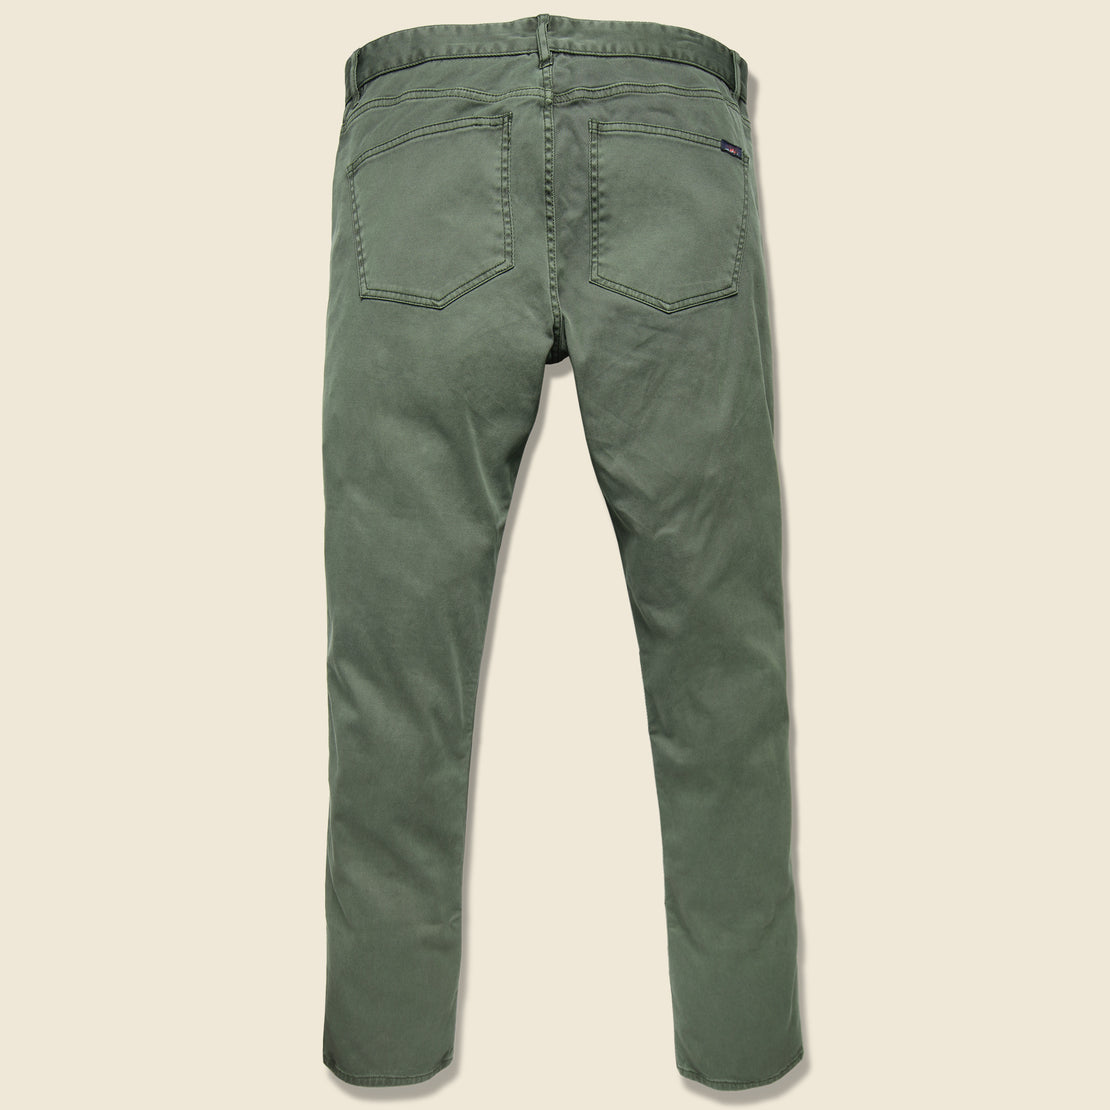 Comfort Twill Jean - Hunter Green - Faherty - STAG Provisions - Pants - Twill